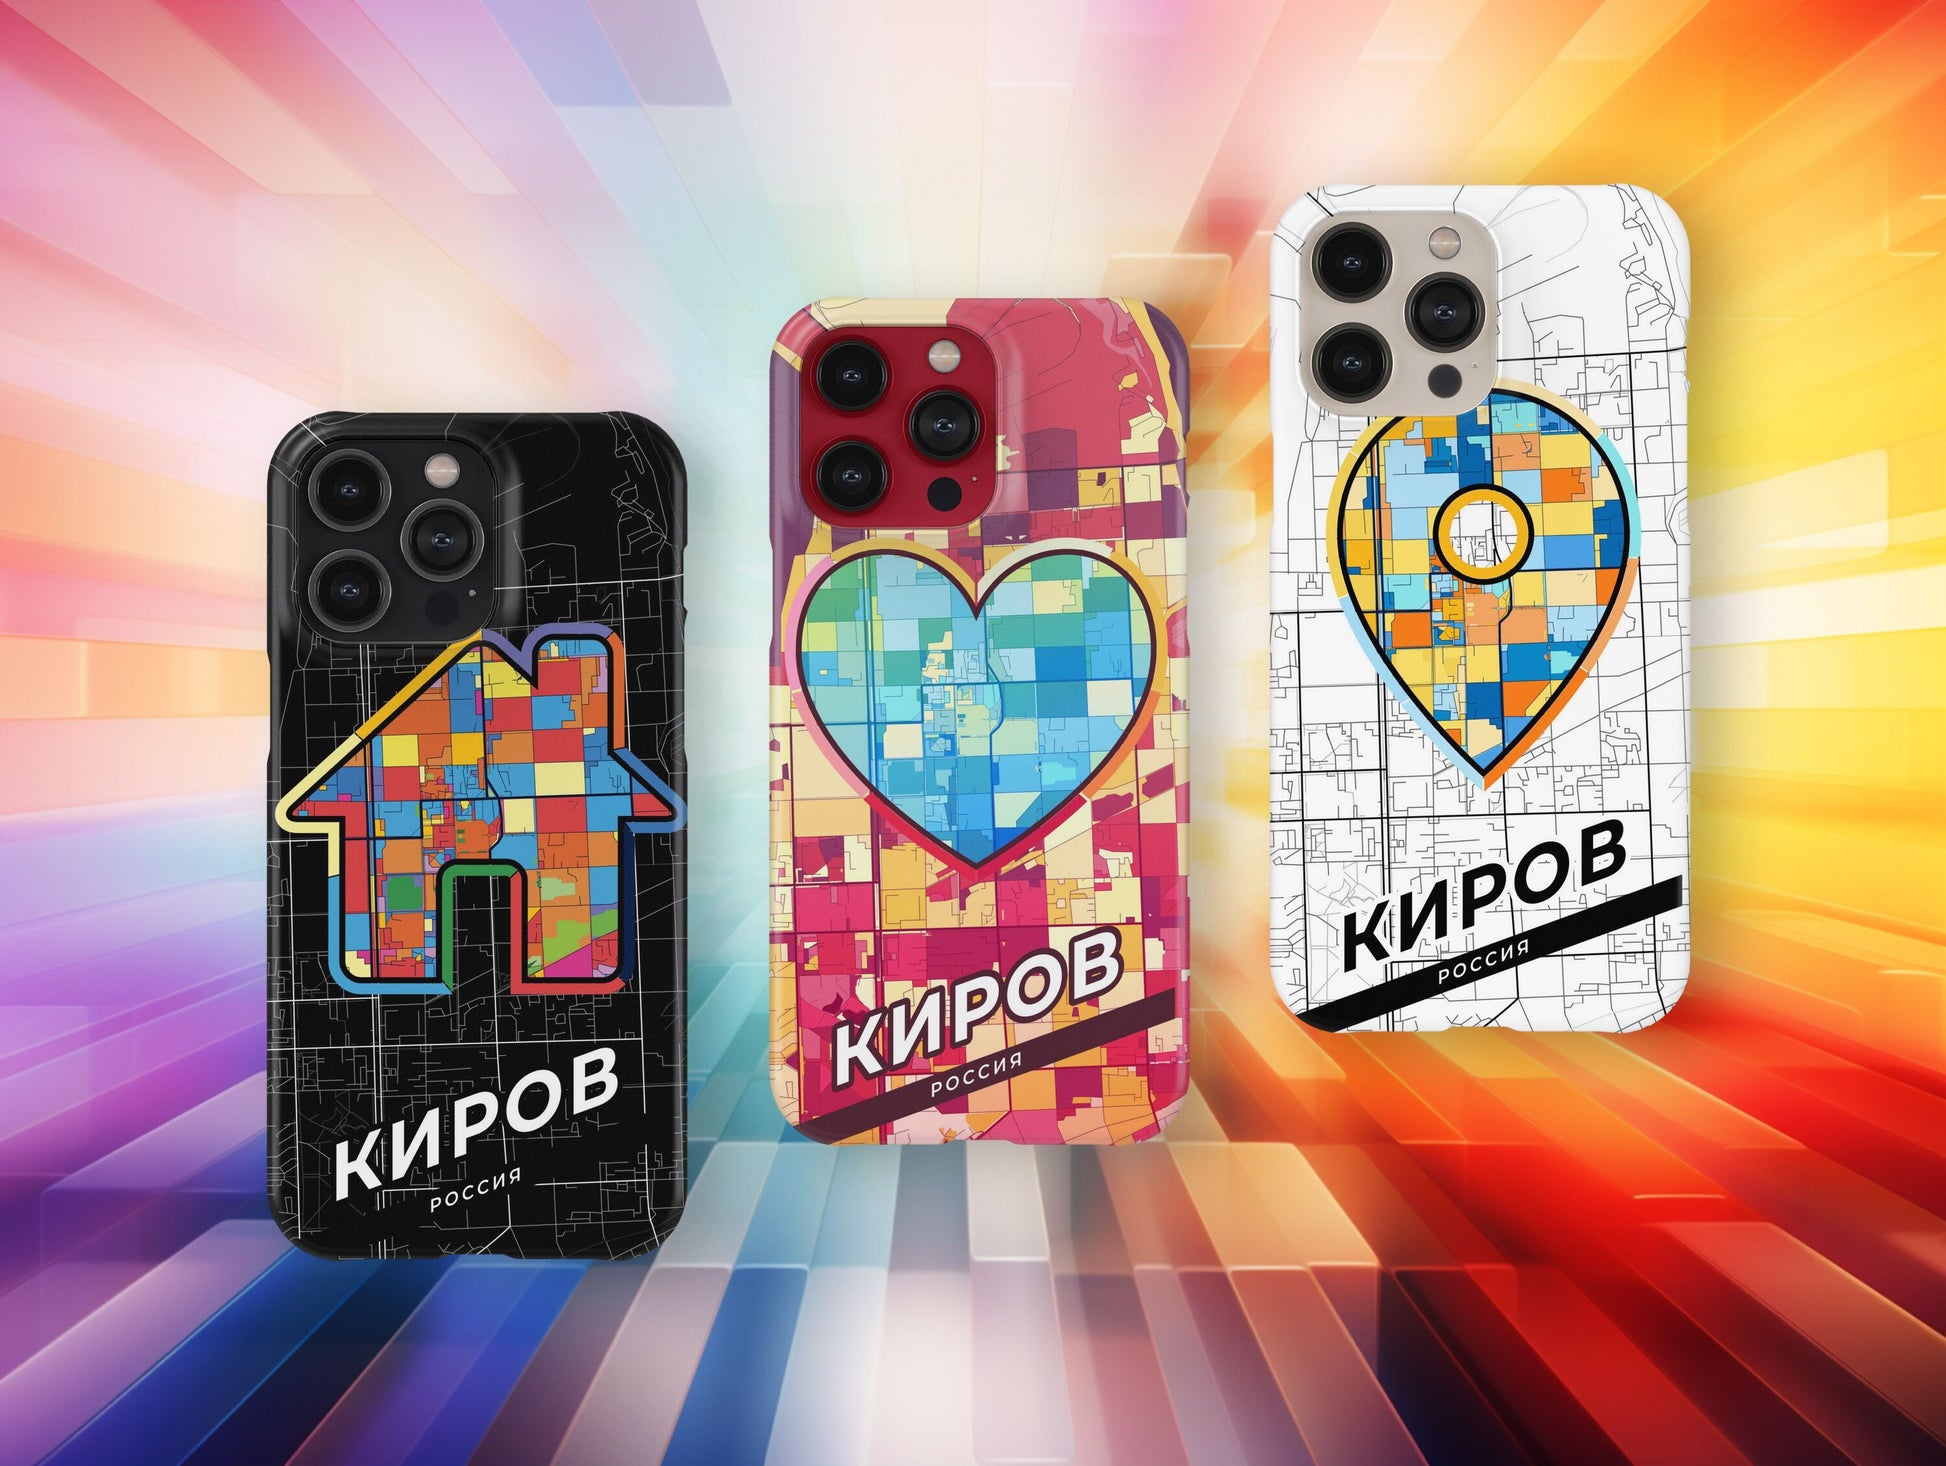 Kirov Russia slim phone case with colorful icon. Birthday, wedding or housewarming gift. Couple match cases.